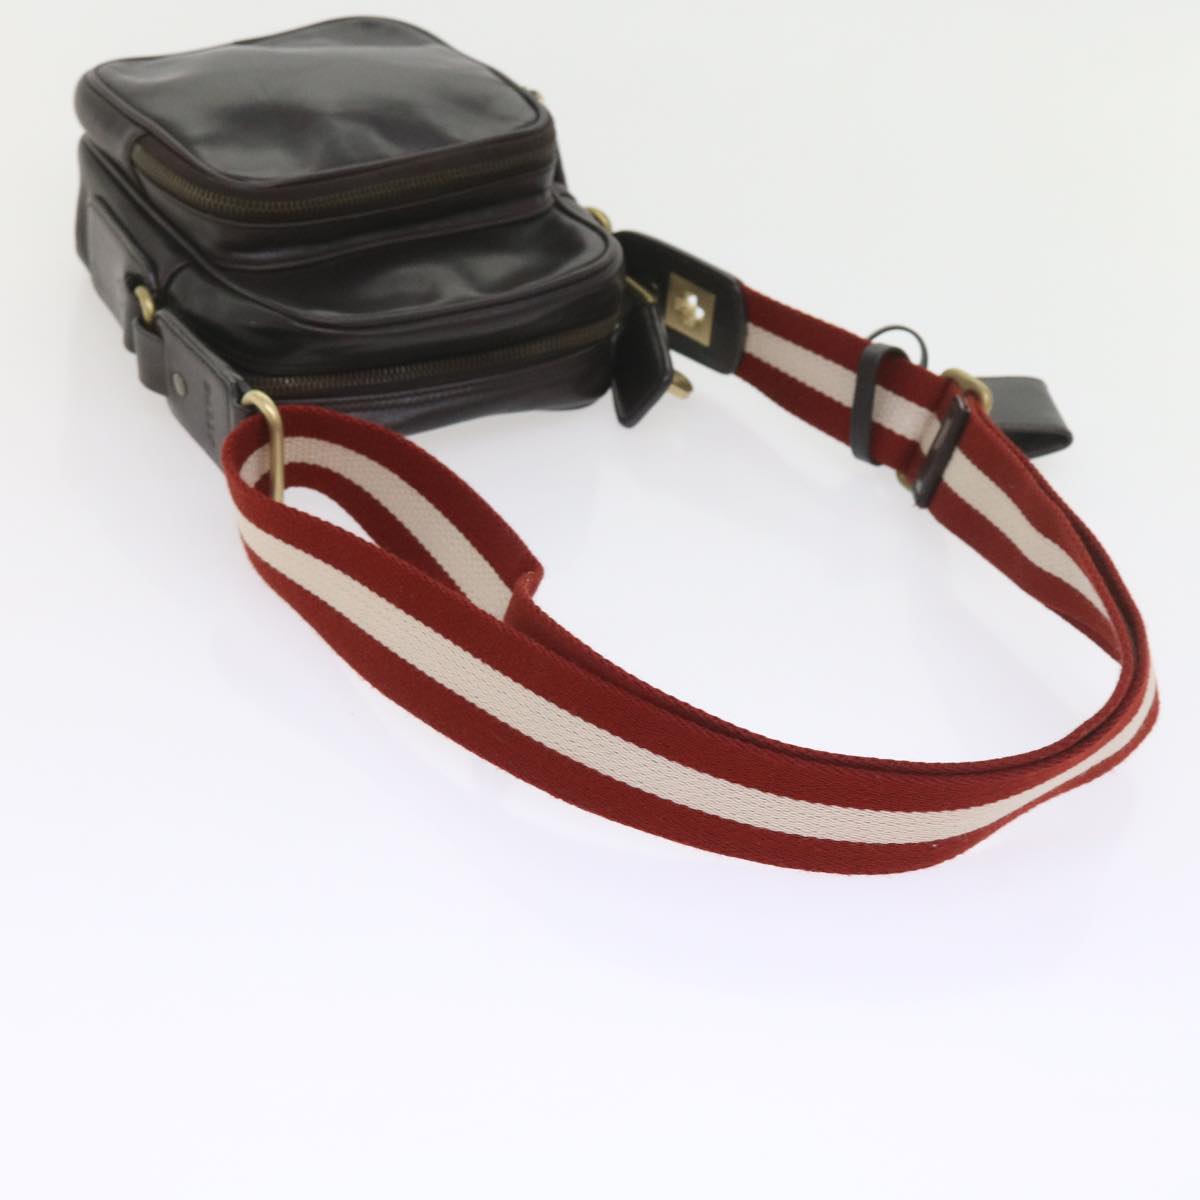 BALLY Shoulder Bag Leather Brown Red white Auth ac2400